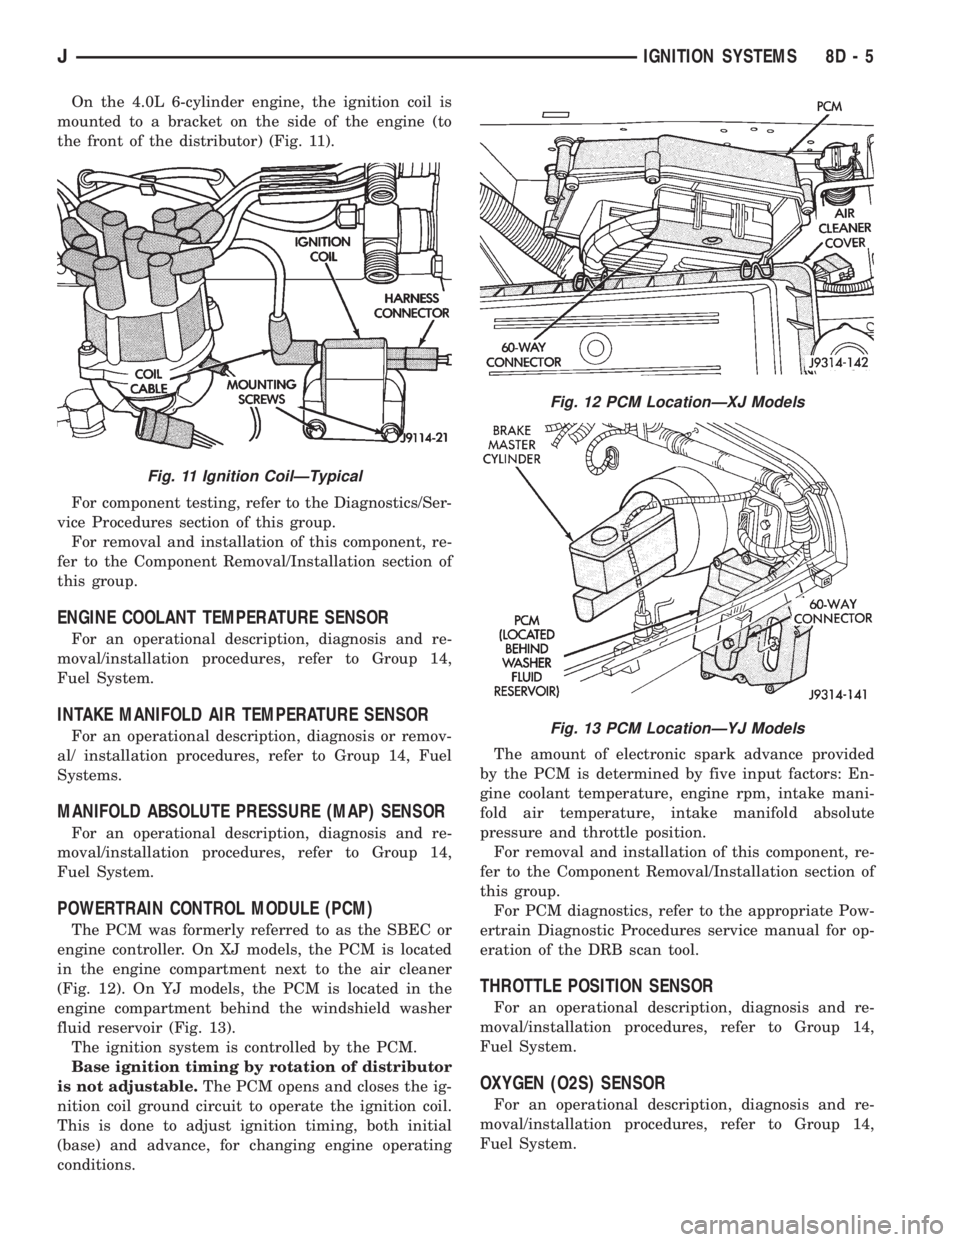 JEEP XJ 1995  Service And Repair Manual On the 4.0L 6-cylinder engine, the ignition coil is
mounted to a bracket on the side of the engine (to
the front of the distributor) (Fig. 11).
For component testing, refer to the Diagnostics/Ser-
vic